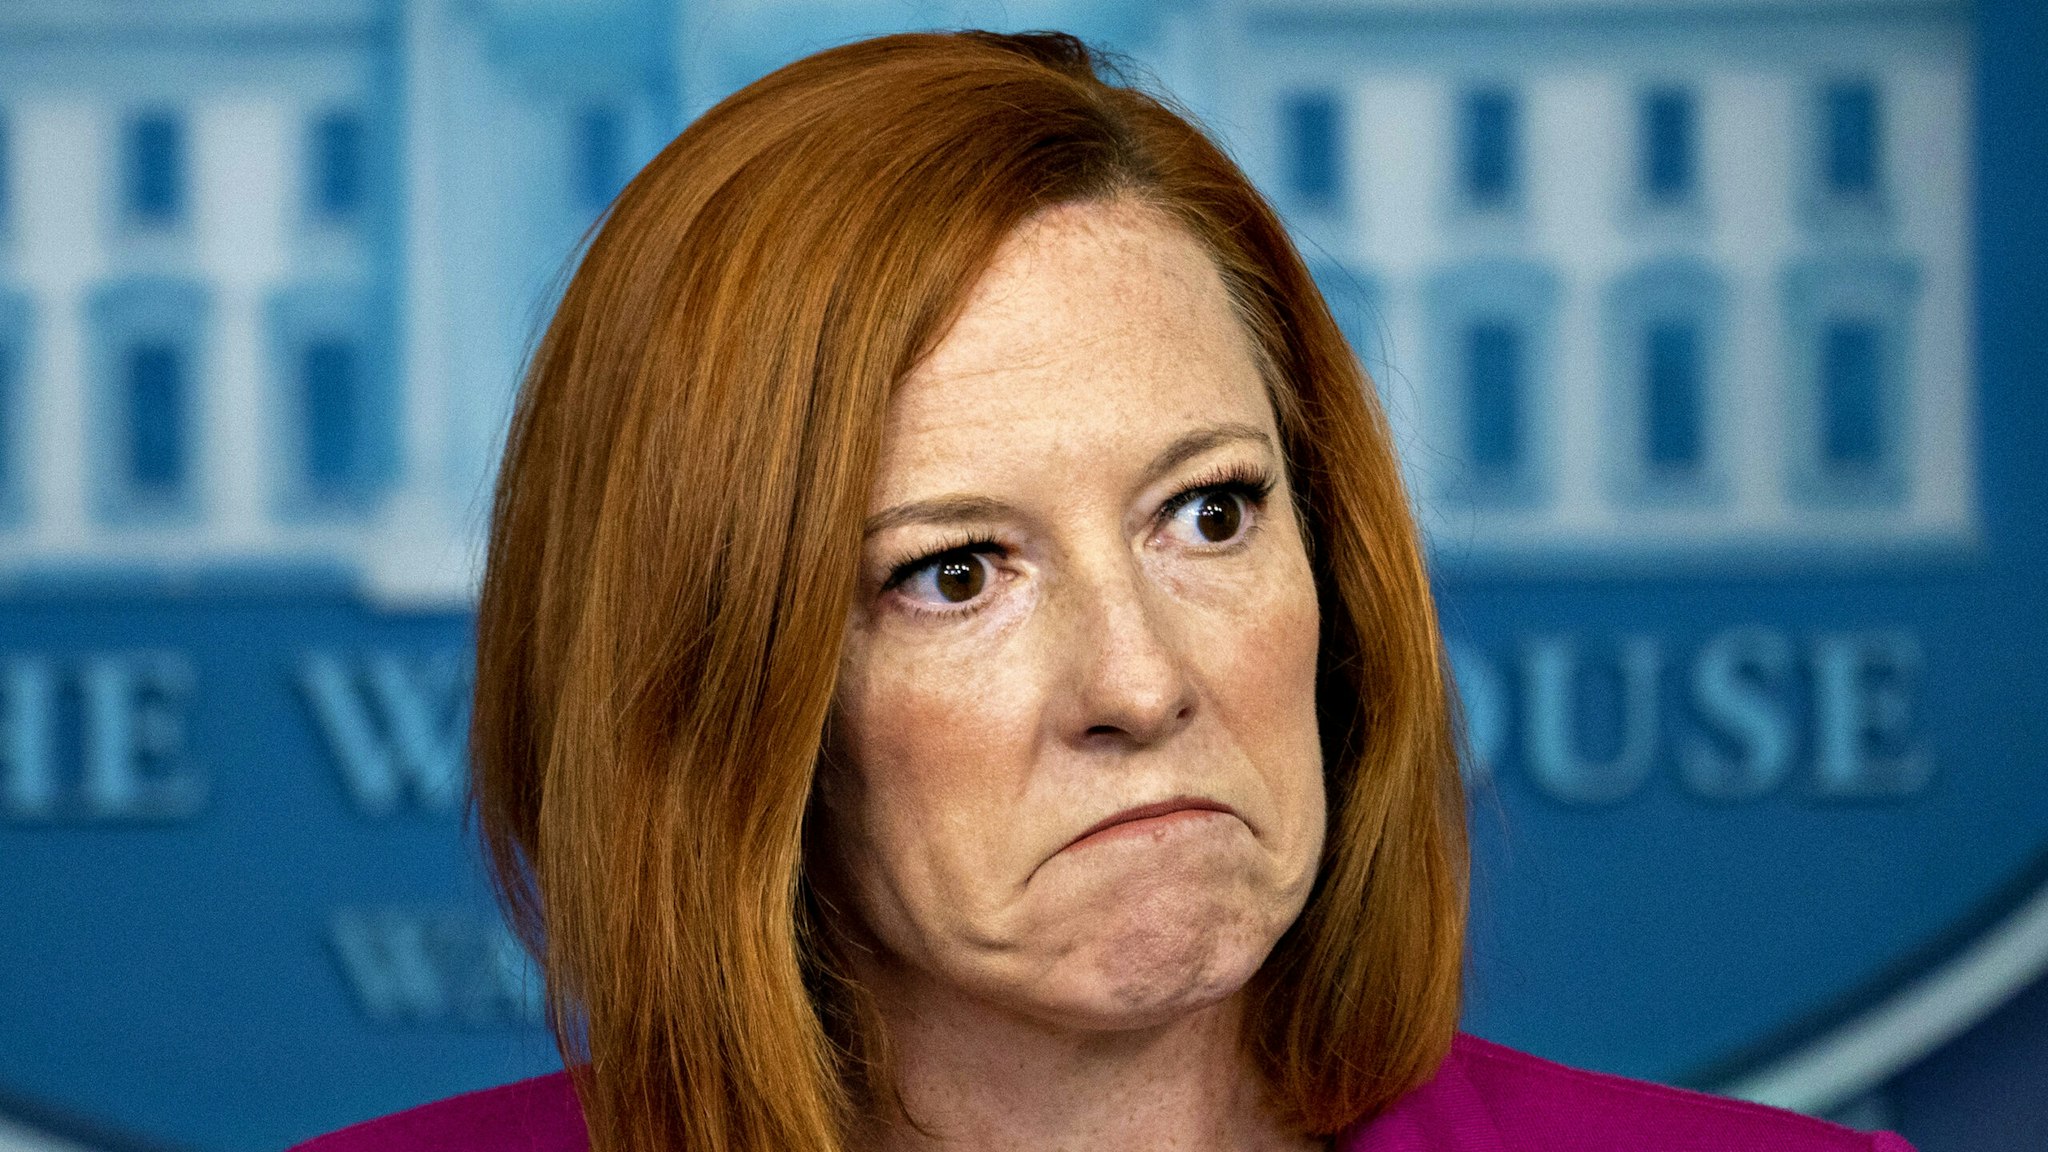 Jen Psaki, White House press secretary, pauses while speaking during a news conference in the James S. Brady Press Briefing Room at the White House in Washington, D.C., U.S., on Wednesday, Aug. 4, 2021. President Biden quelled for now a brewing confrontation with progressive Democrats with a new moratorium on evictions during the pandemic, but the order invites a legal fight with high-stakes consequences for public health.